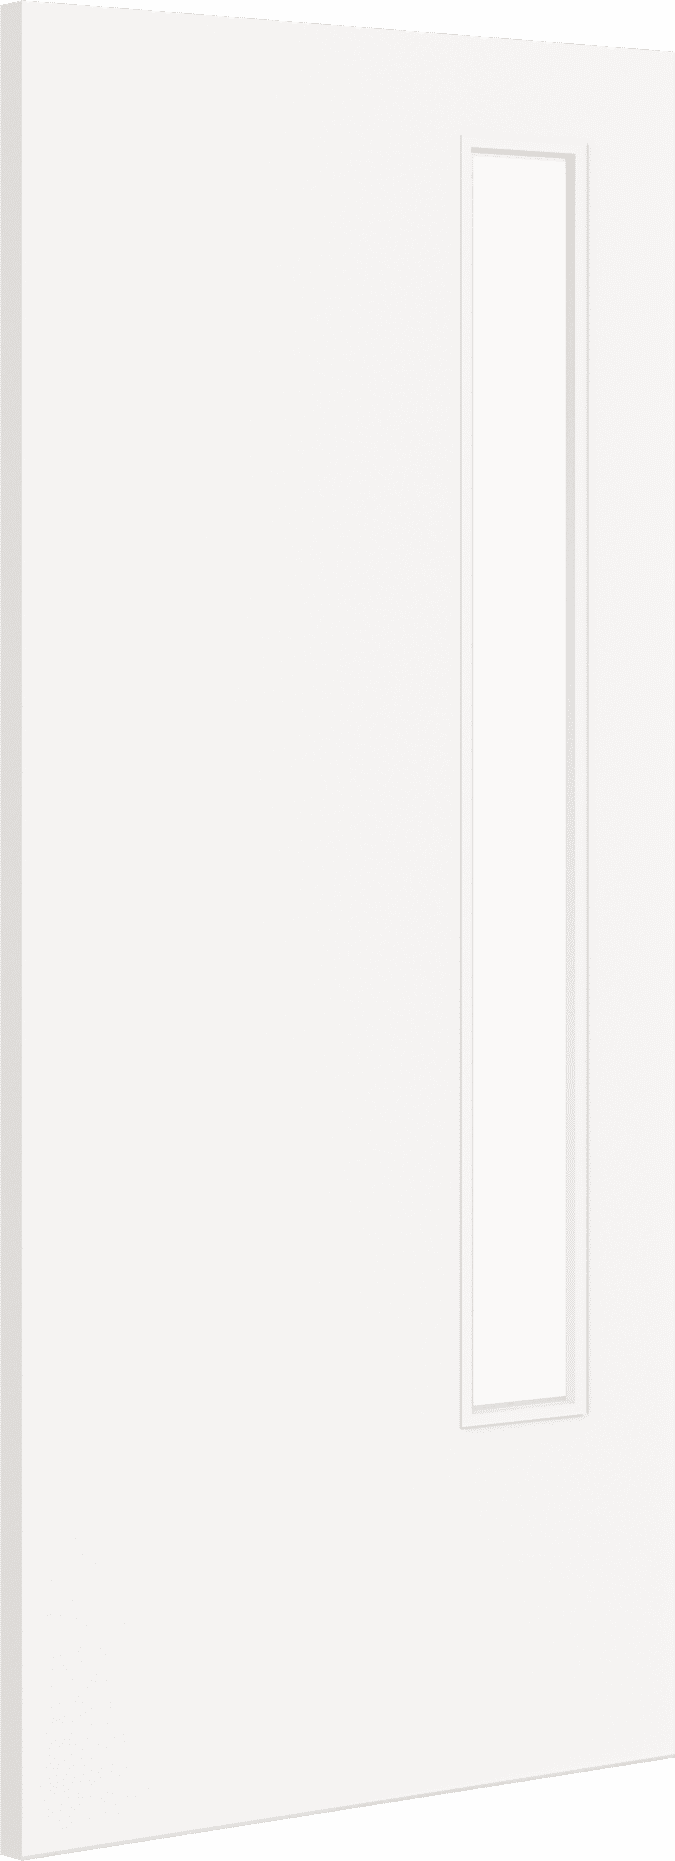 1981mm x 533mm x 44mm (21") Architectural Paint Grade White 13 Clear Glazed Fire Door Blank